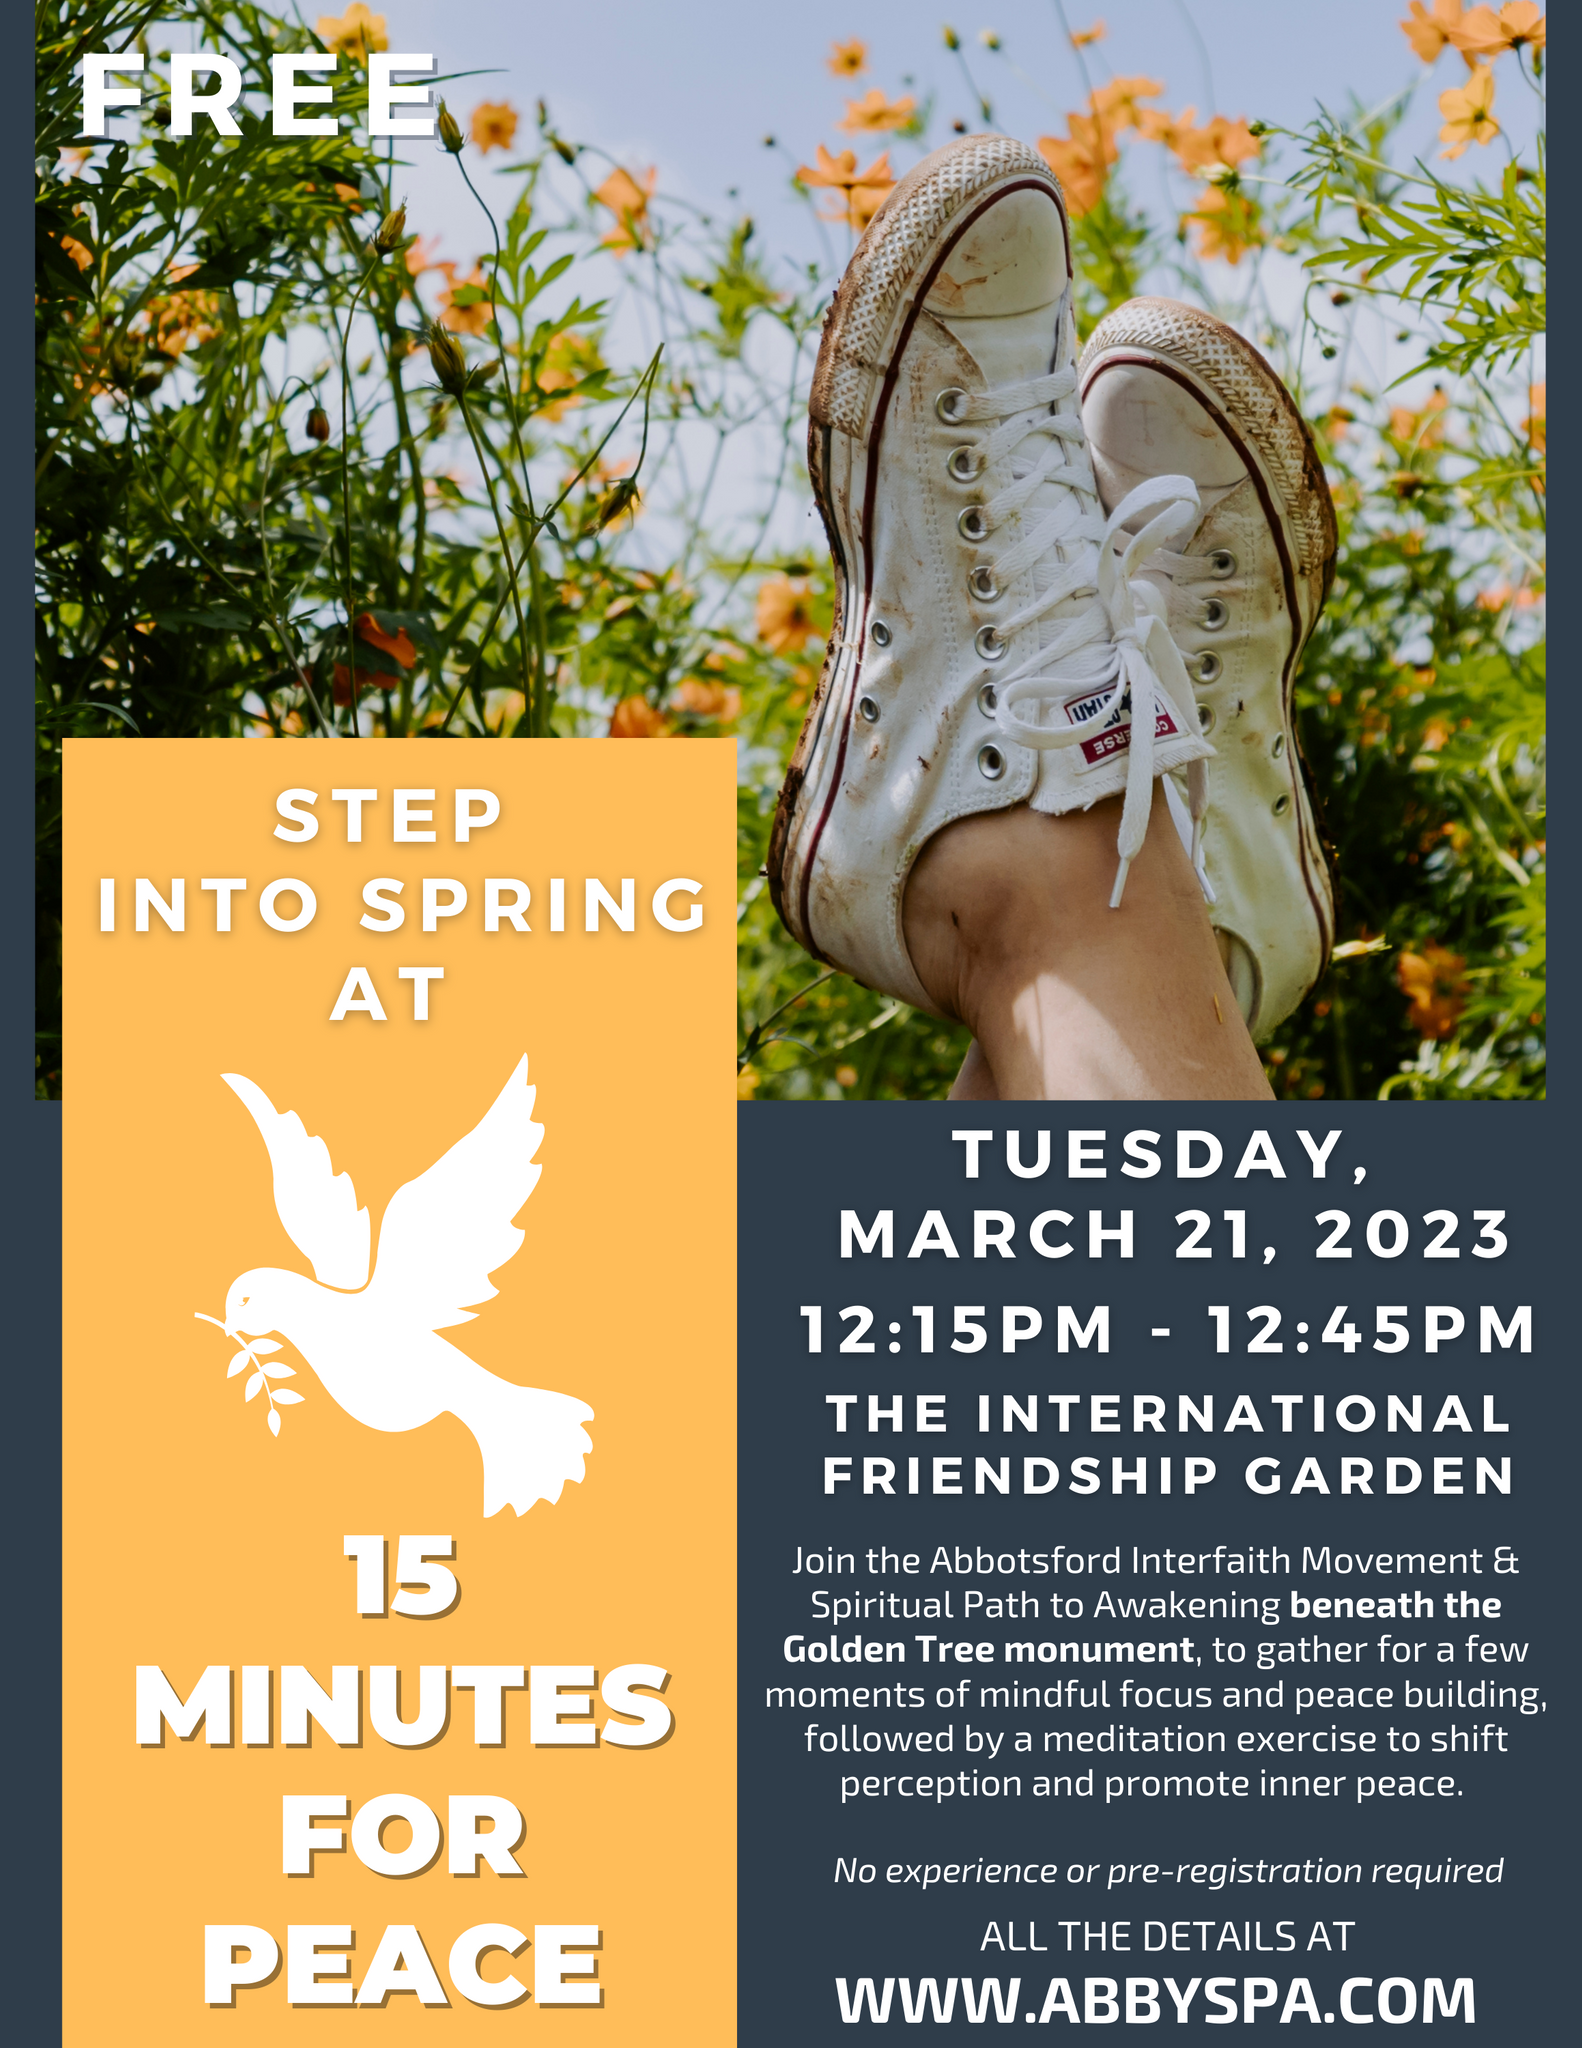 Step into Spring at 15 MINUTES FOR PEACE